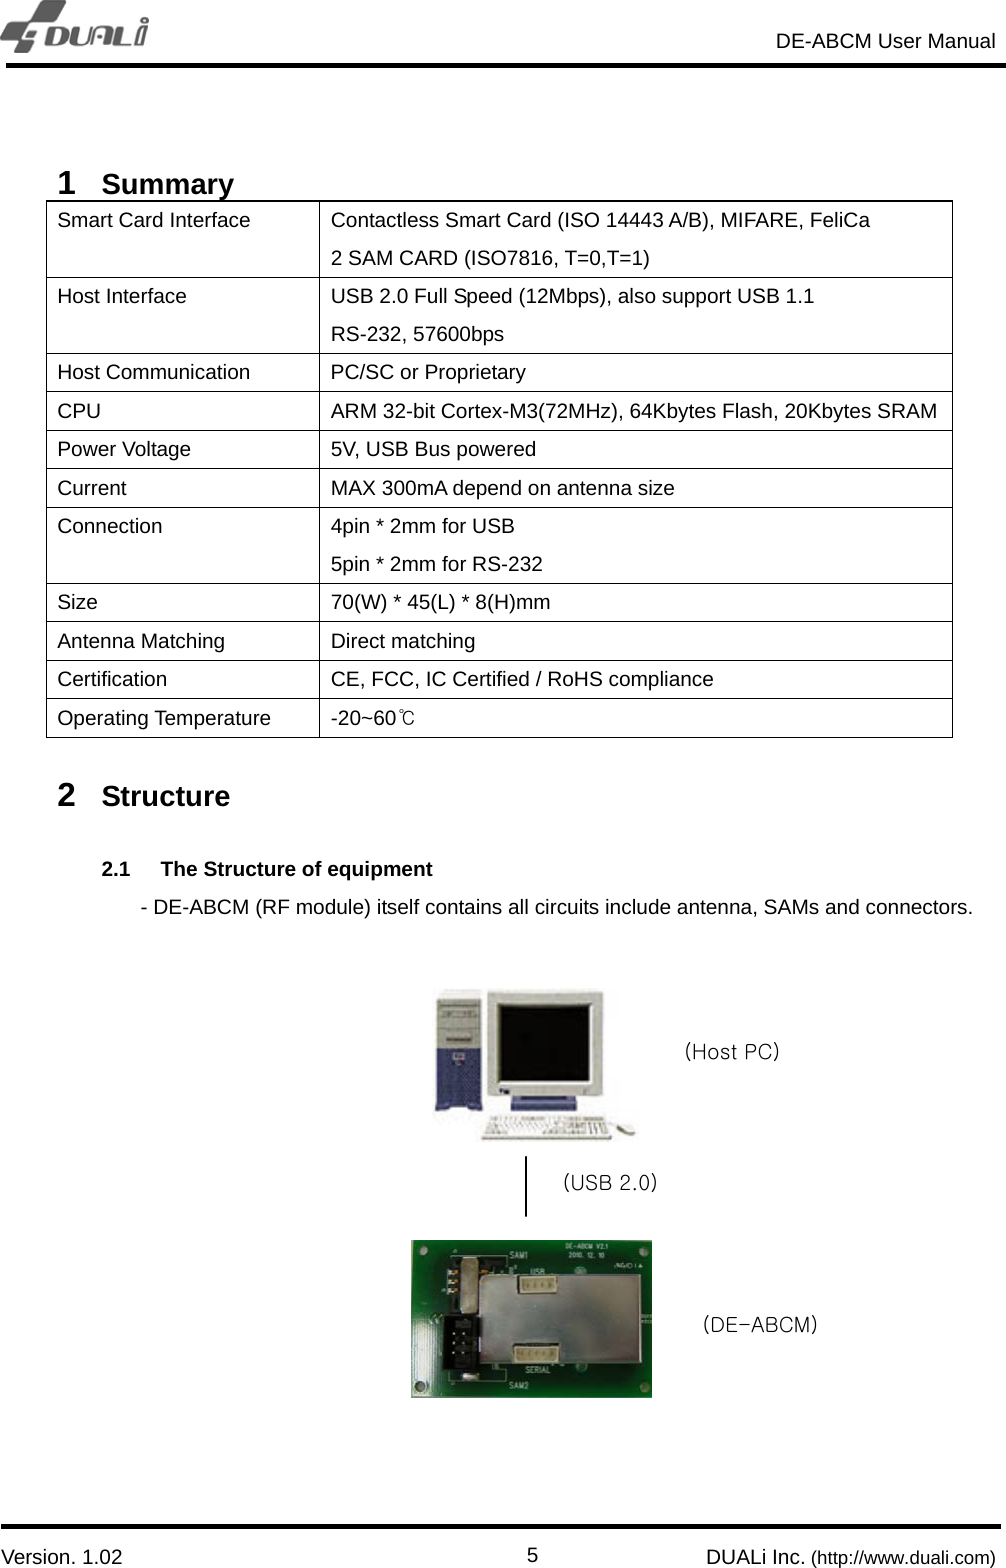                                                                       DE-ABCM User Manual                            Version. 1.02                                                        DUALi Inc. (http://www.duali.com)  5 1  Summary Smart Card Interface  Contactless Smart Card (ISO 14443 A/B), MIFARE, FeliCa 2 SAM CARD (ISO7816, T=0,T=1) Host Interface  USB 2.0 Full Speed (12Mbps), also support USB 1.1 RS-232, 57600bps Host Communication  PC/SC or Proprietary CPU  ARM 32-bit Cortex-M3(72MHz), 64Kbytes Flash, 20Kbytes SRAMPower Voltage  5V, USB Bus powered Current  MAX 300mA depend on antenna size Connection    4pin * 2mm for USB 5pin * 2mm for RS-232 Size  70(W) * 45(L) * 8(H)mm Antenna Matching  Direct matching Certification  CE, FCC, IC Certified / RoHS compliance Operating Temperature  -20~60℃  2  Structure  2.1  The Structure of equipment - DE-ABCM (RF module) itself contains all circuits include antenna, SAMs and connectors.            (Host PC) (DE-ABCM)   (USB 2.0)